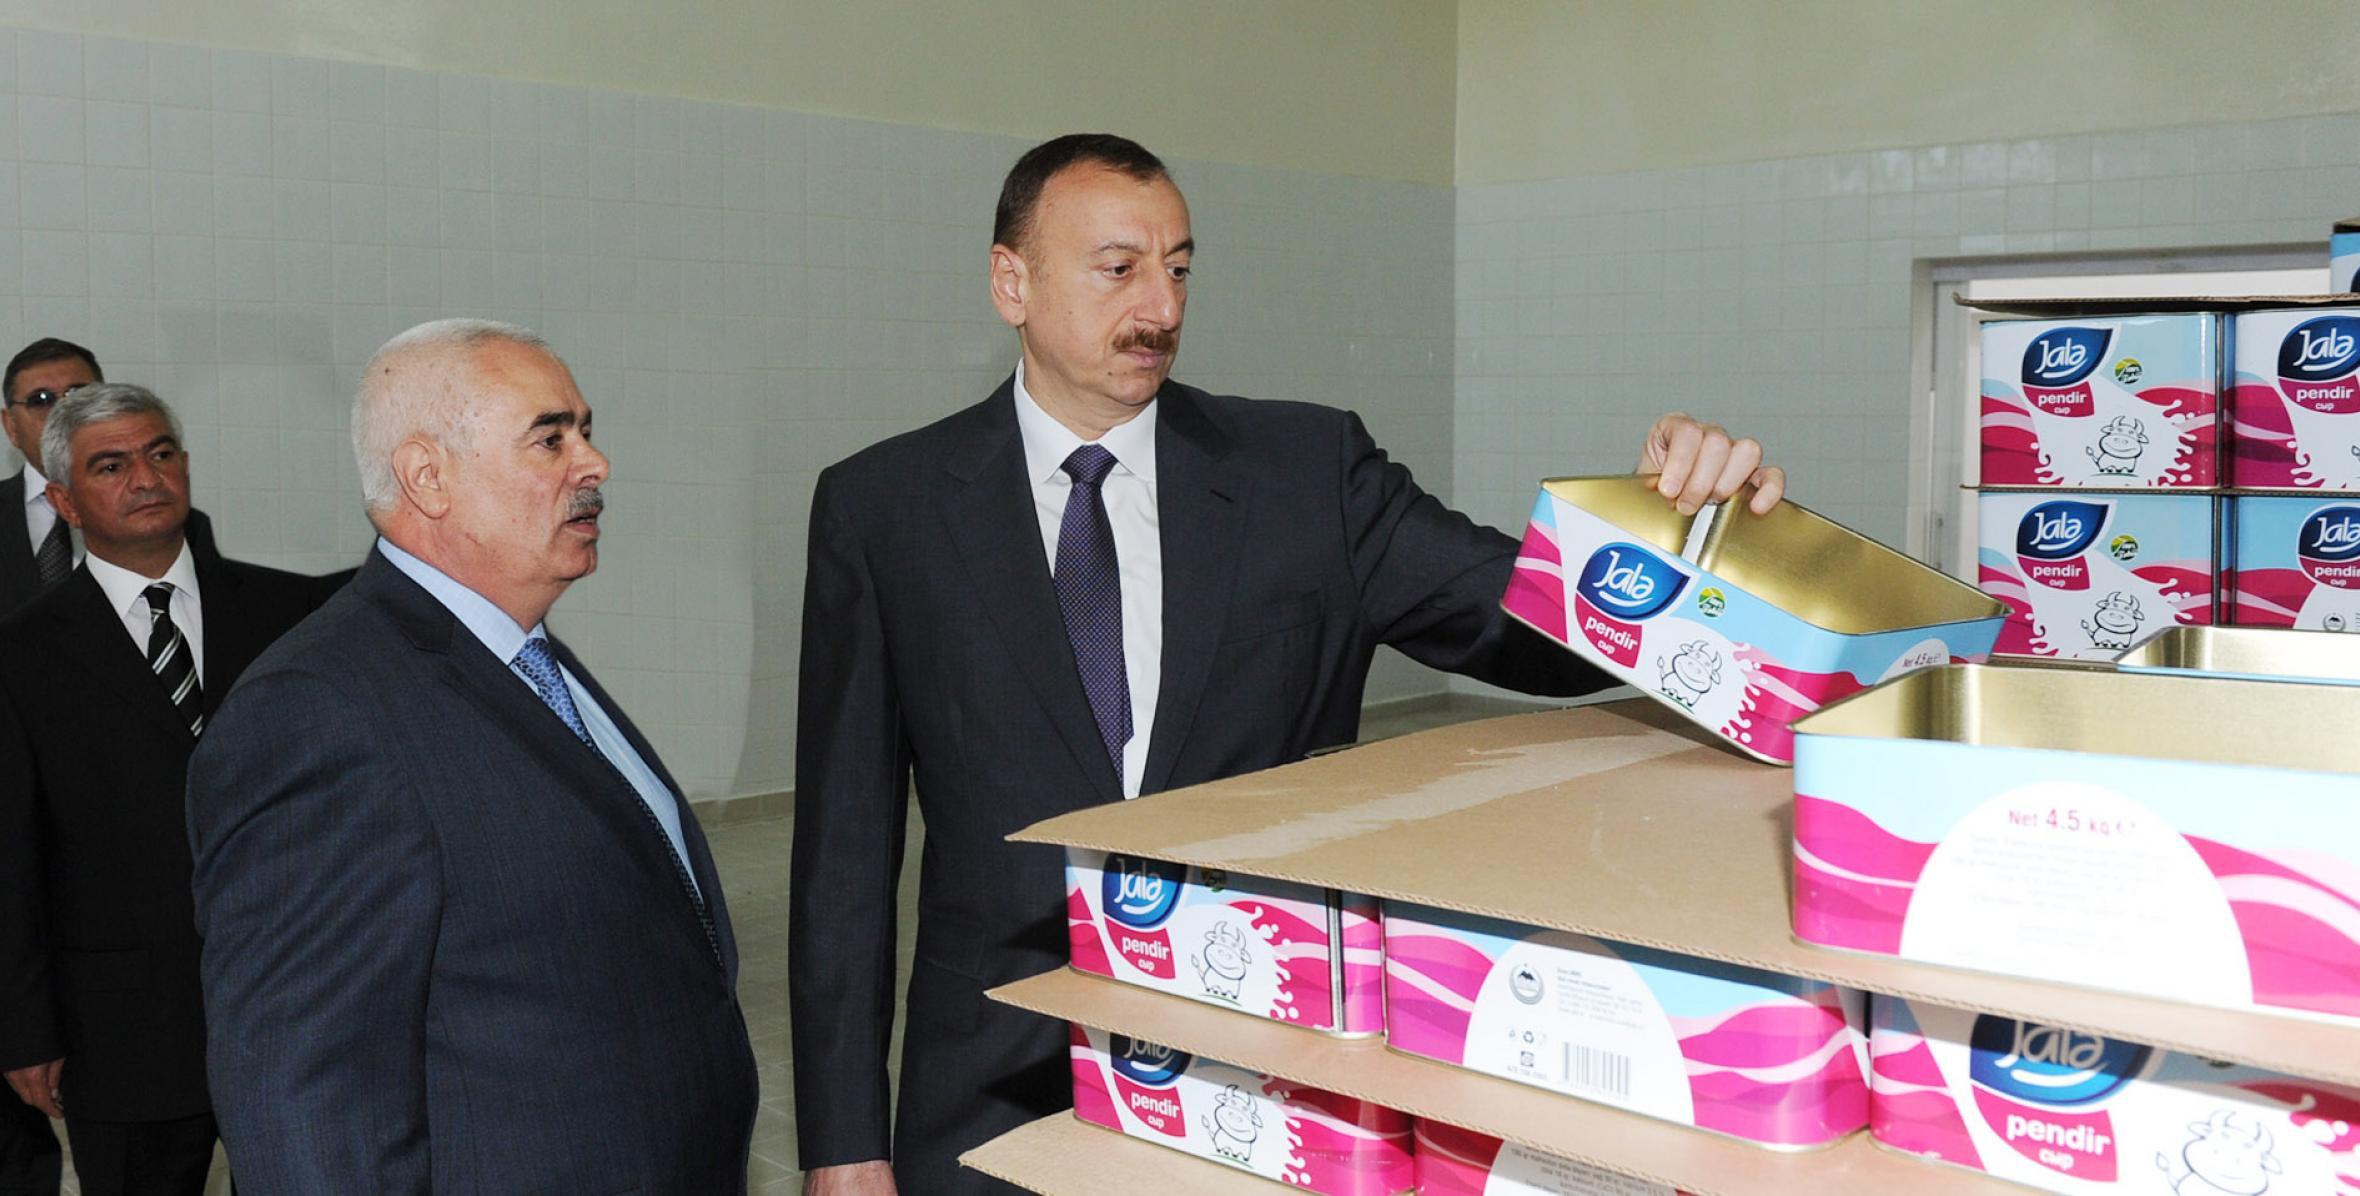 Ilham Aliyev attended the opening of a new dairy plant in the town of Agjabadi